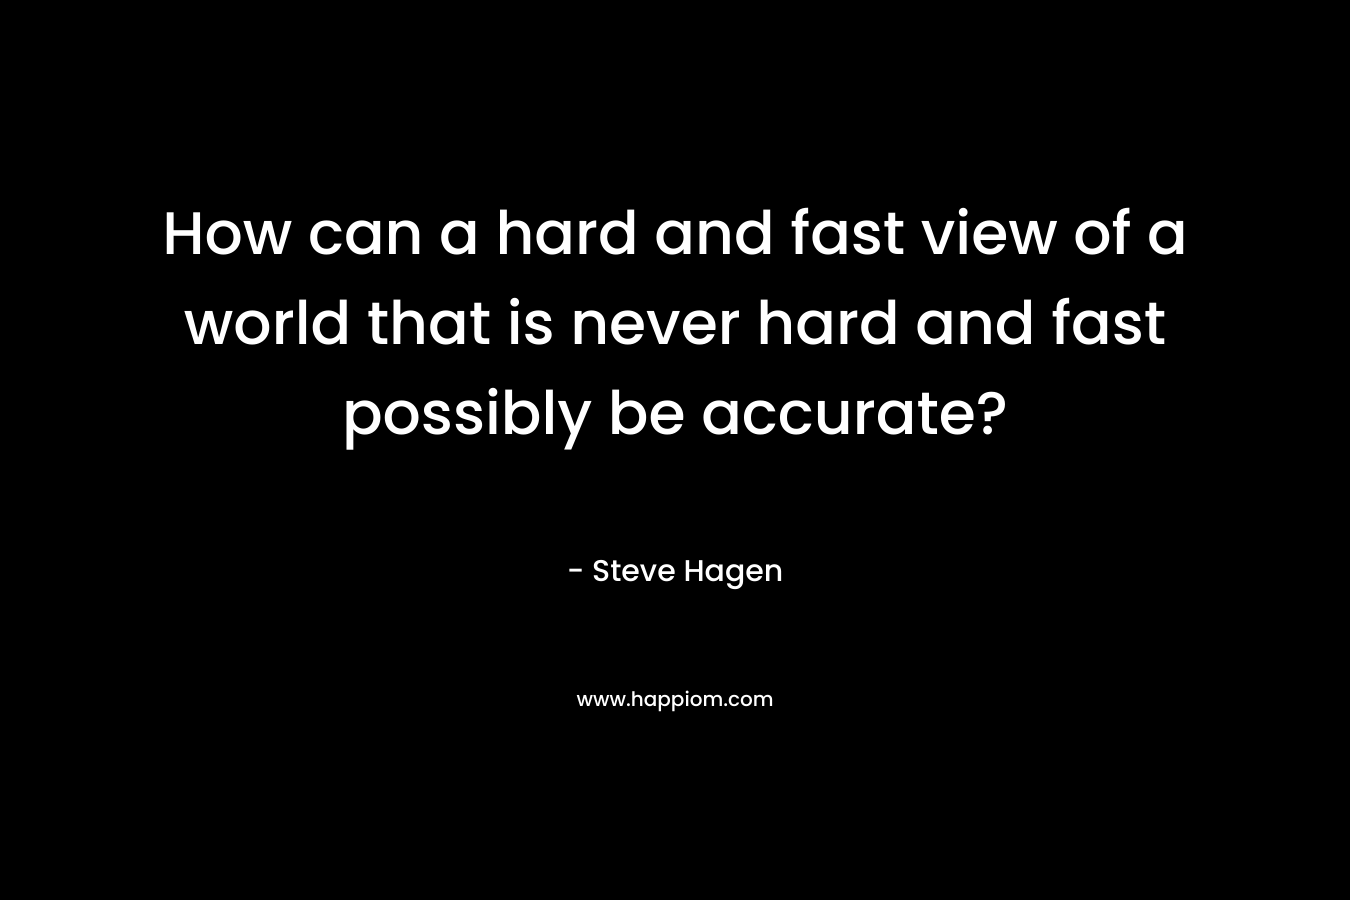 How can a hard and fast view of a world that is never hard and fast possibly be accurate? – Steve Hagen